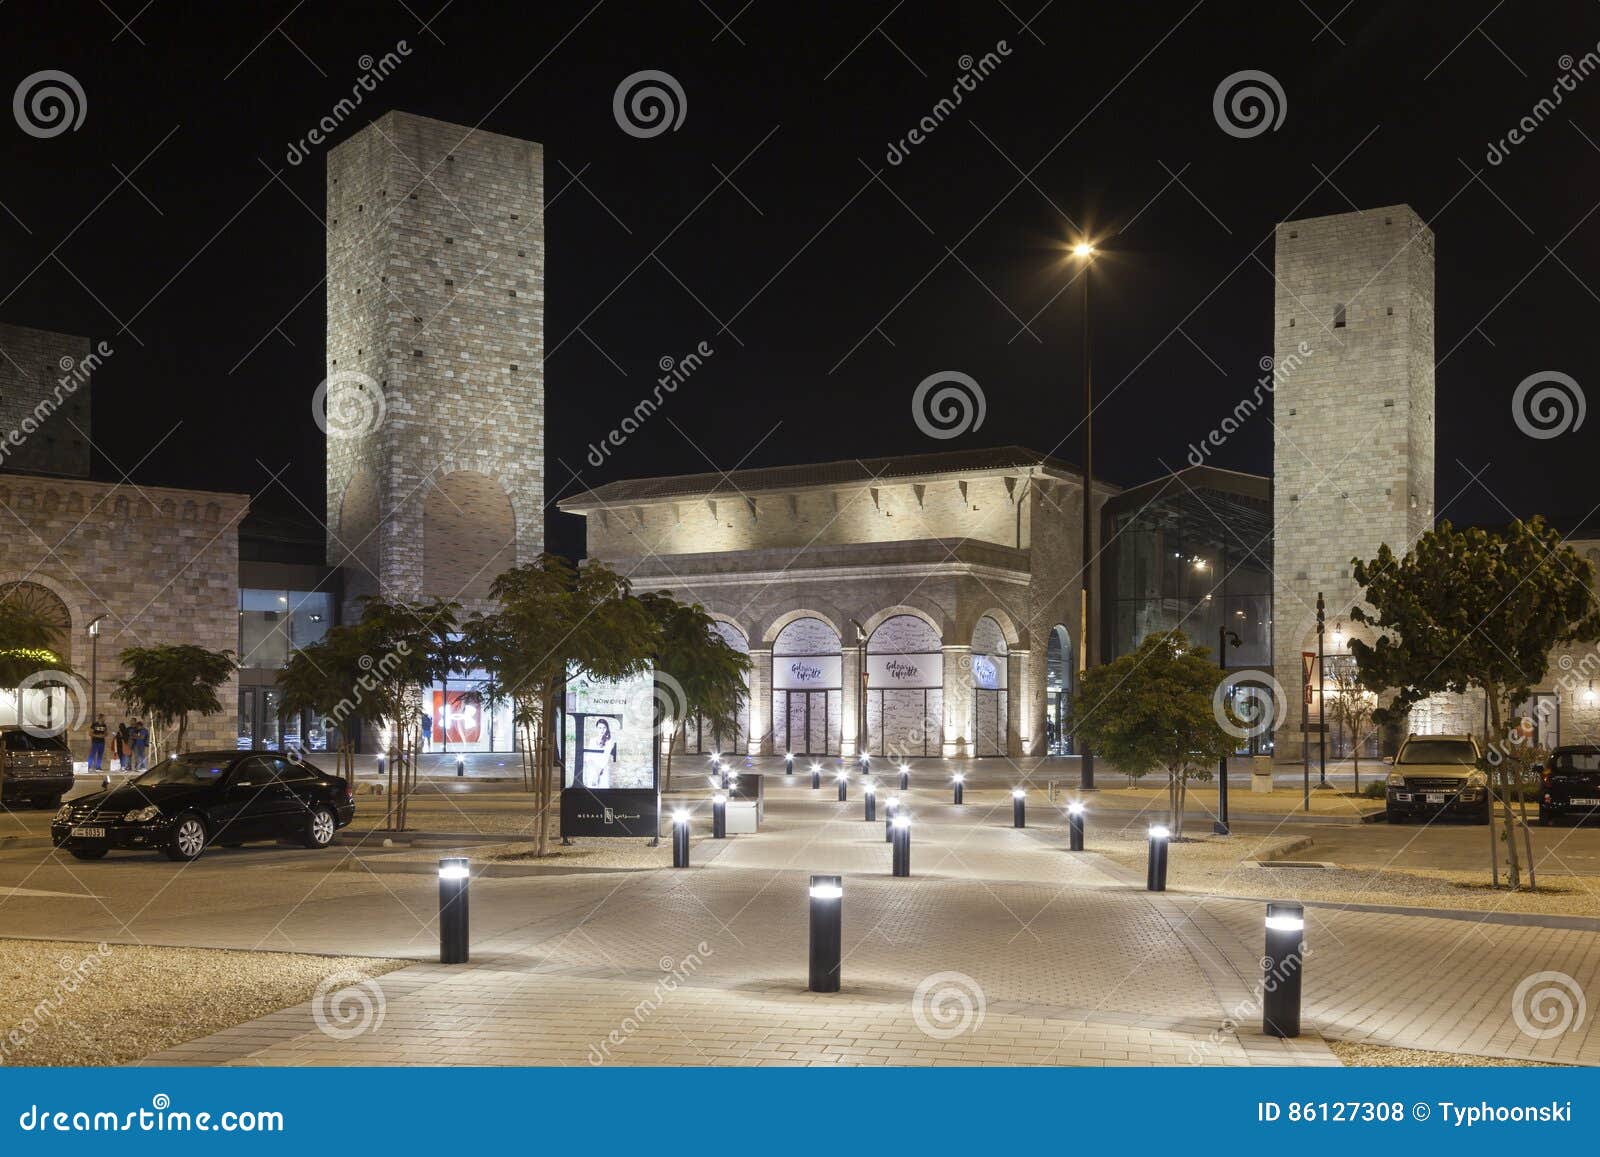 Outlet Village in Dubai editorial stock photo. Image of jebel - 86127308